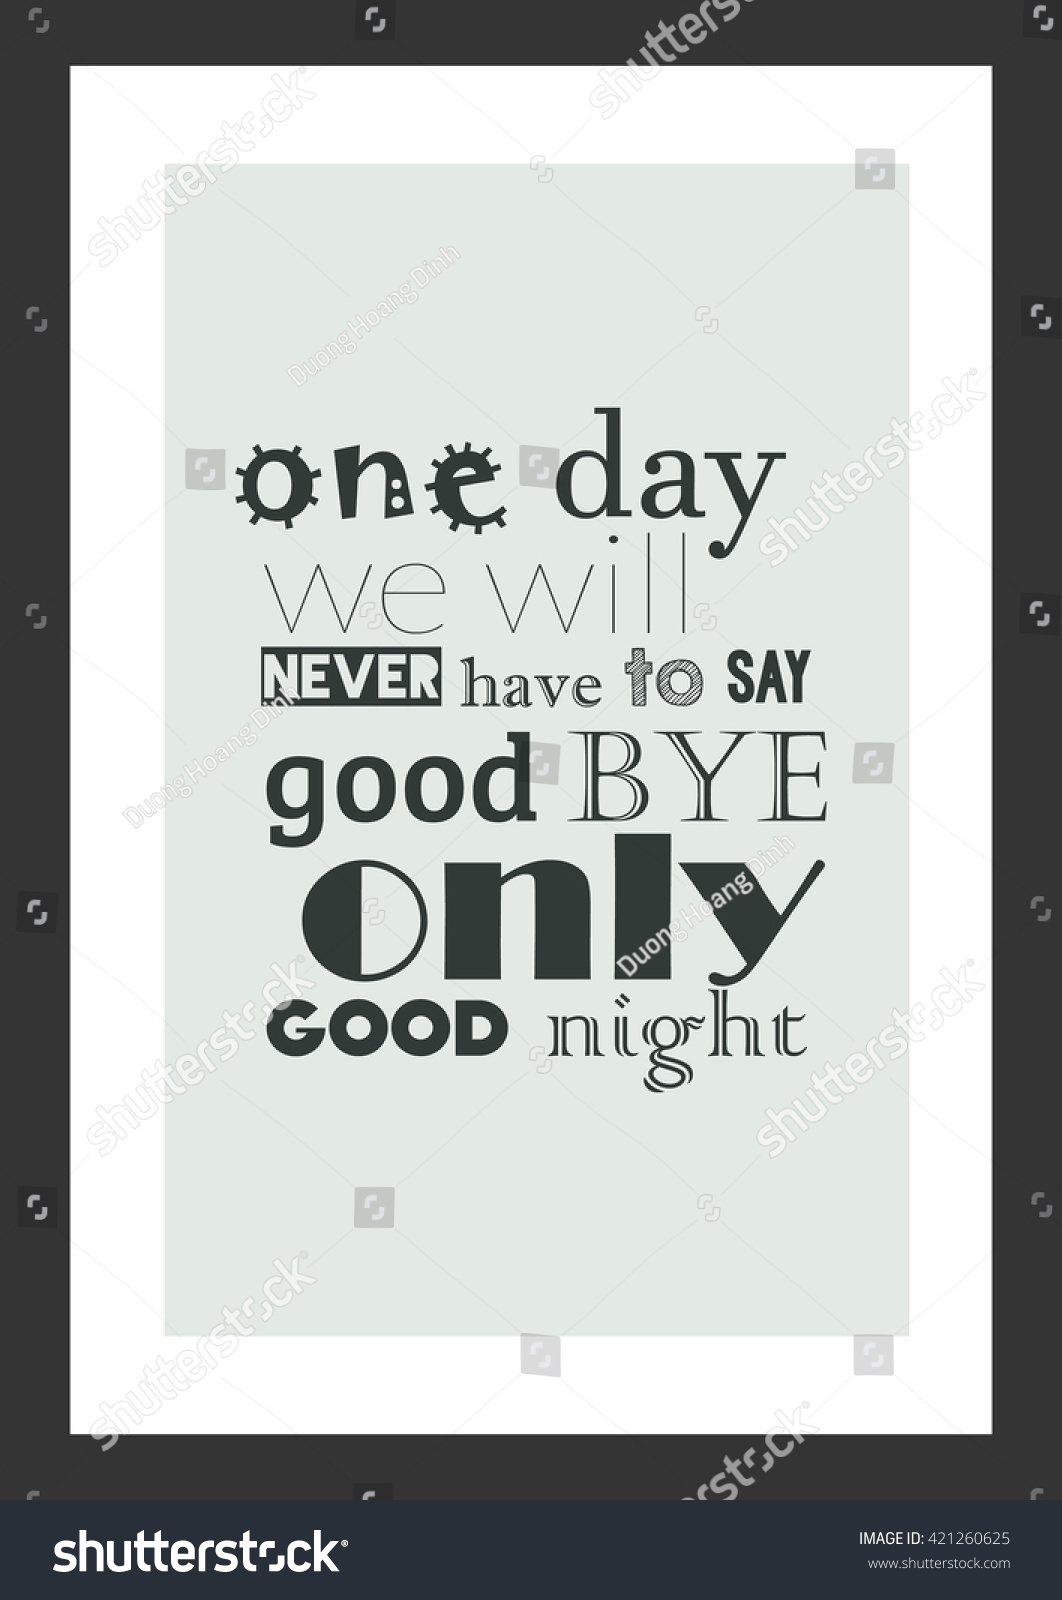 Love quote e day we will never have to say goodbye only goodnight